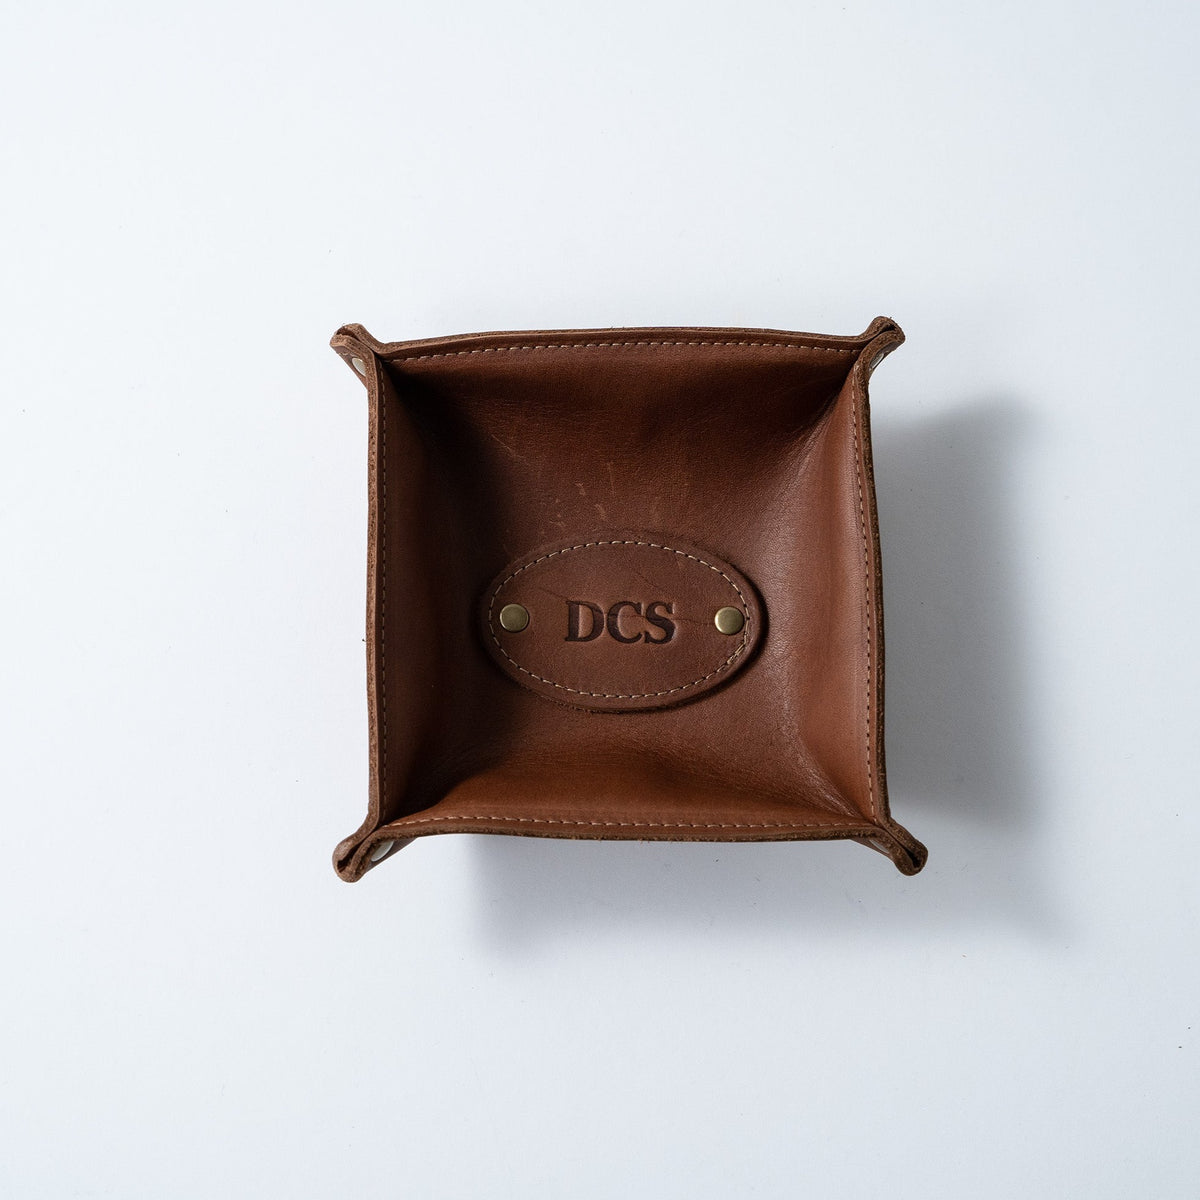 The Monticello Fine Leather Personalized Desk Valet Caddy Tray for Dresser or Office Gift